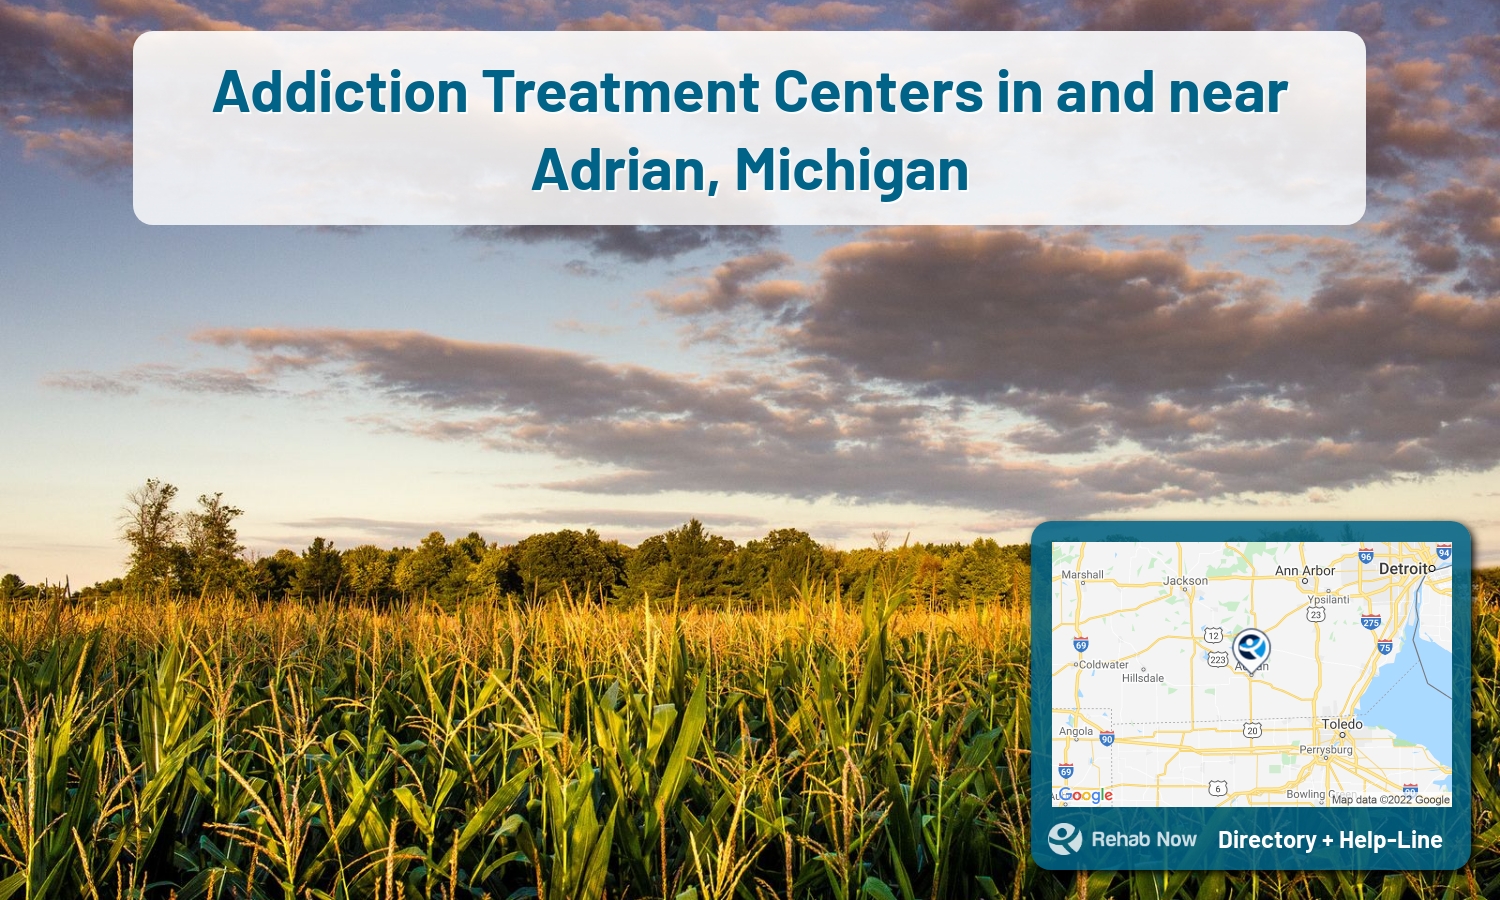 Those struggling with addiction can find help through addiction rehab facilities in Adrian, MI. Get help now!